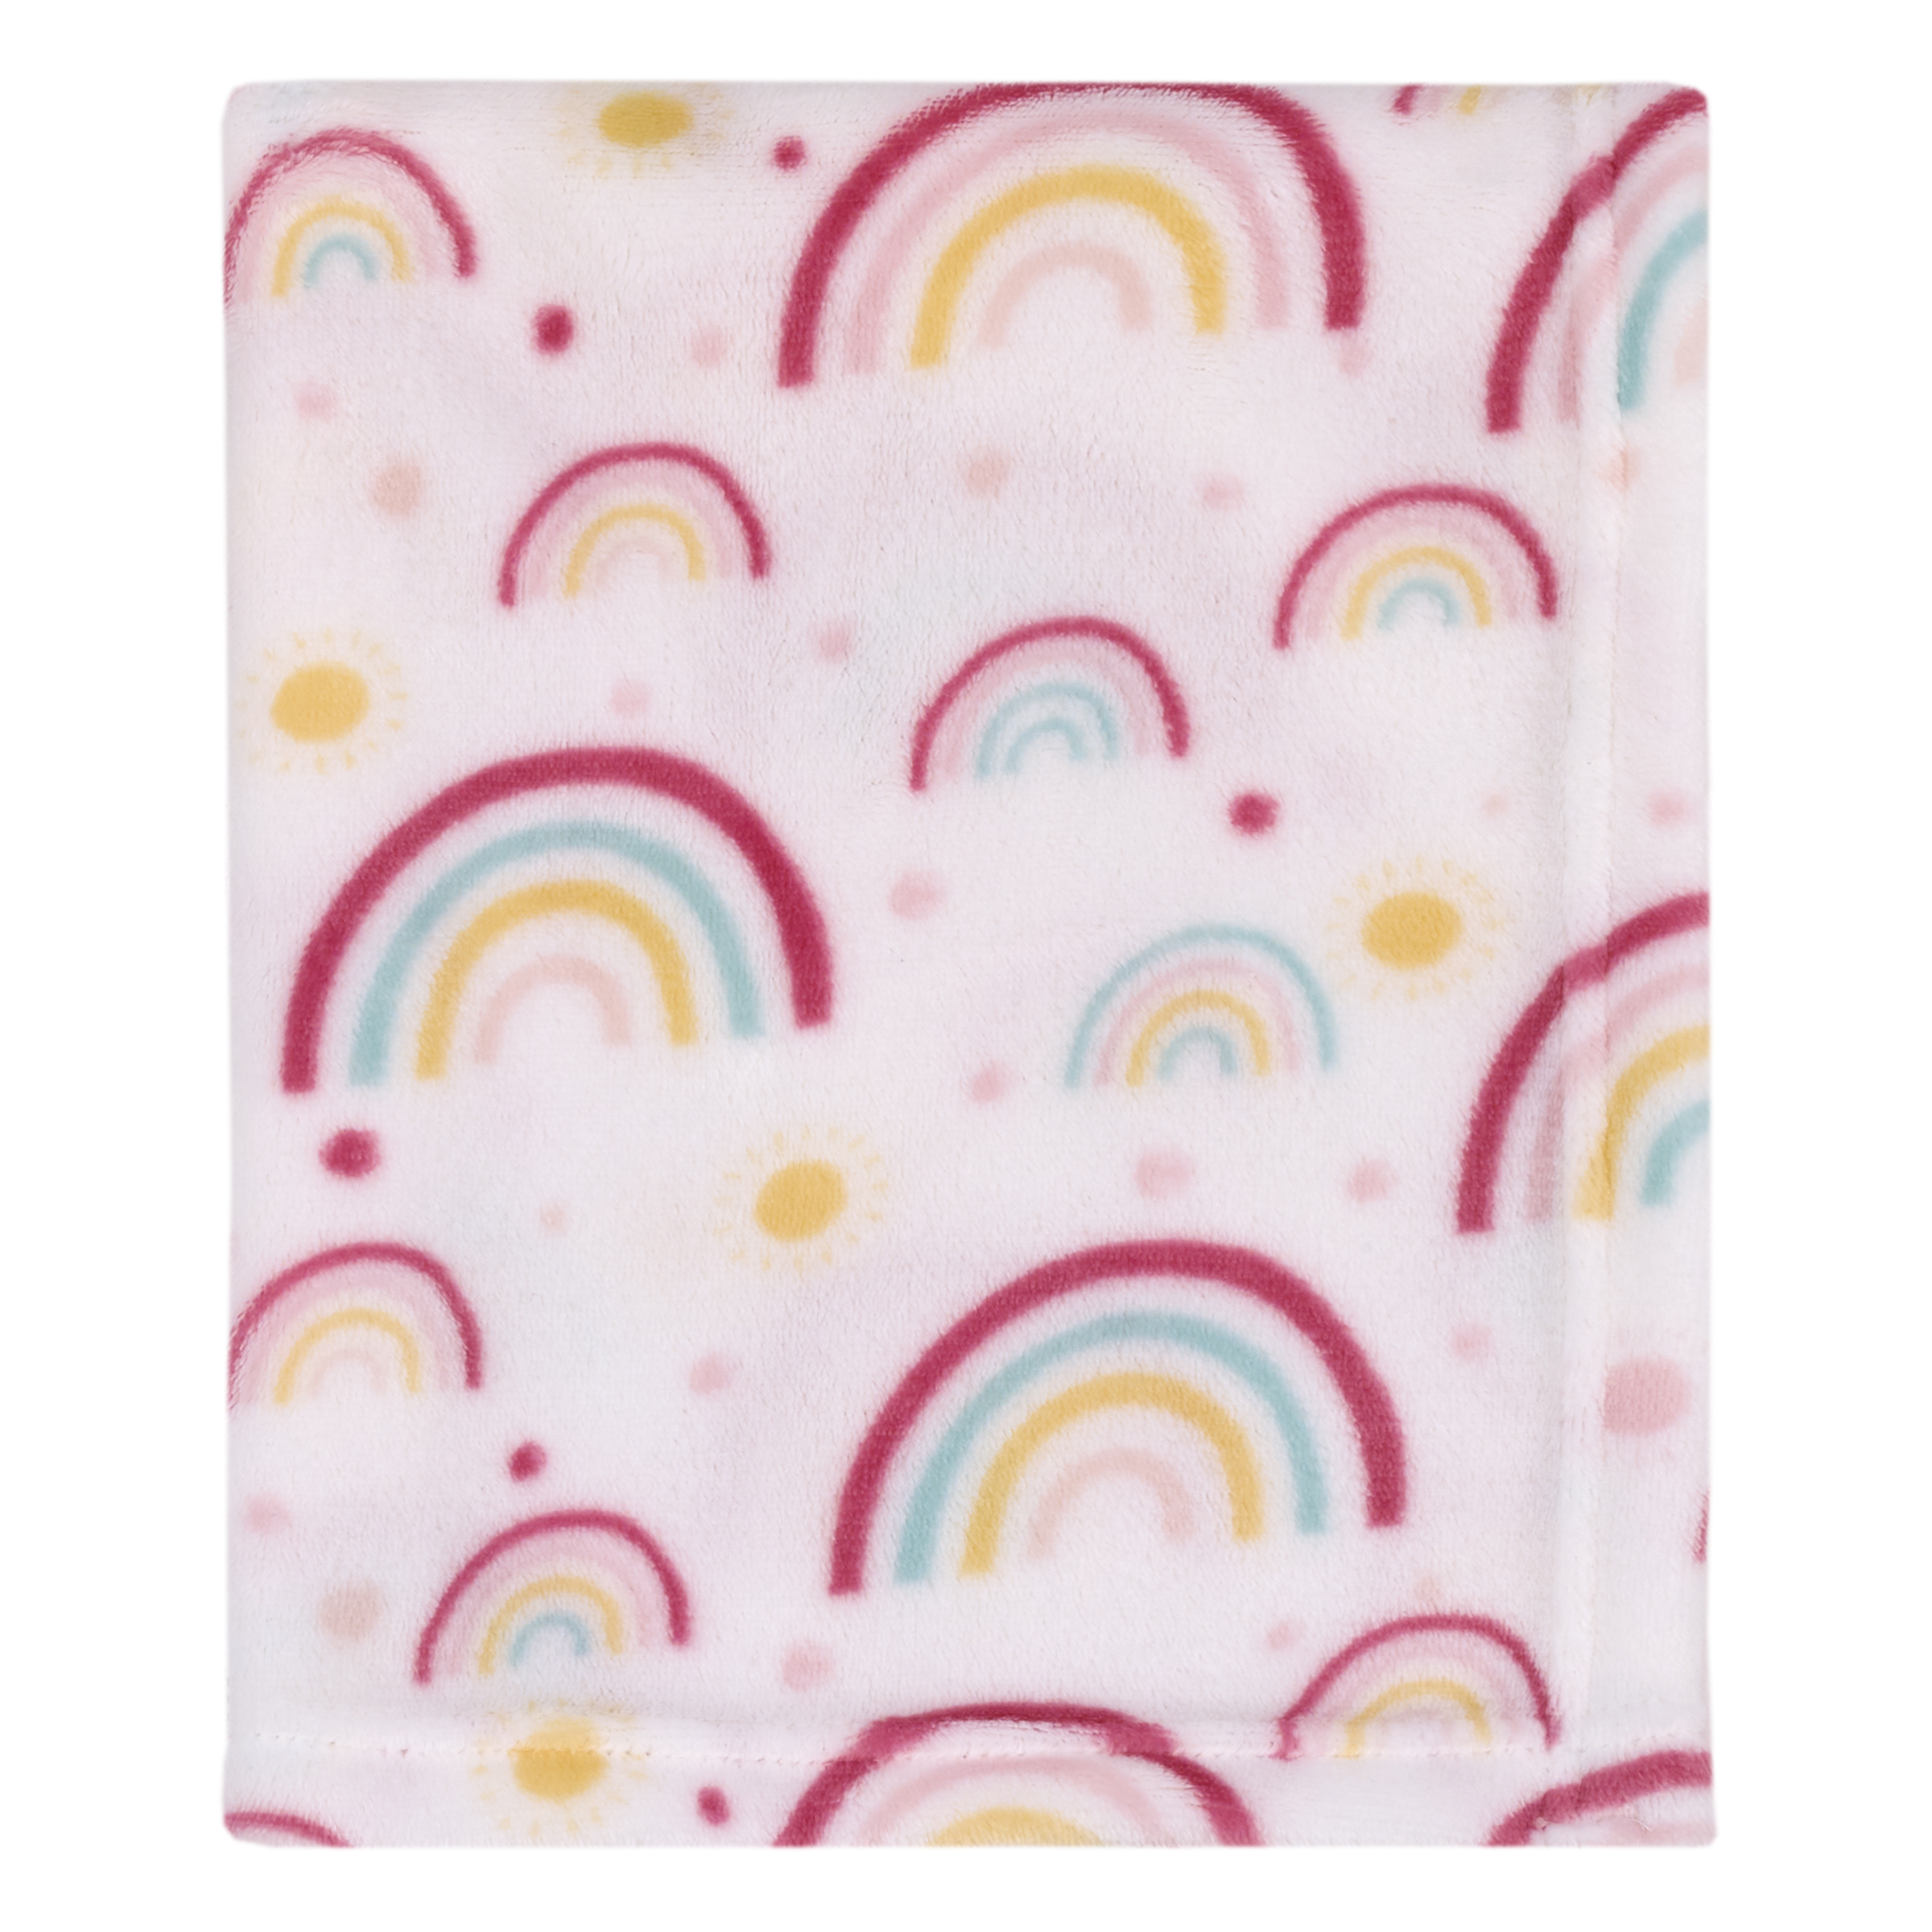 Parent's Choice Plush Baby Blanket, Rainbows, 30" x 36", Pink, Infant Girl - image 3 of 11